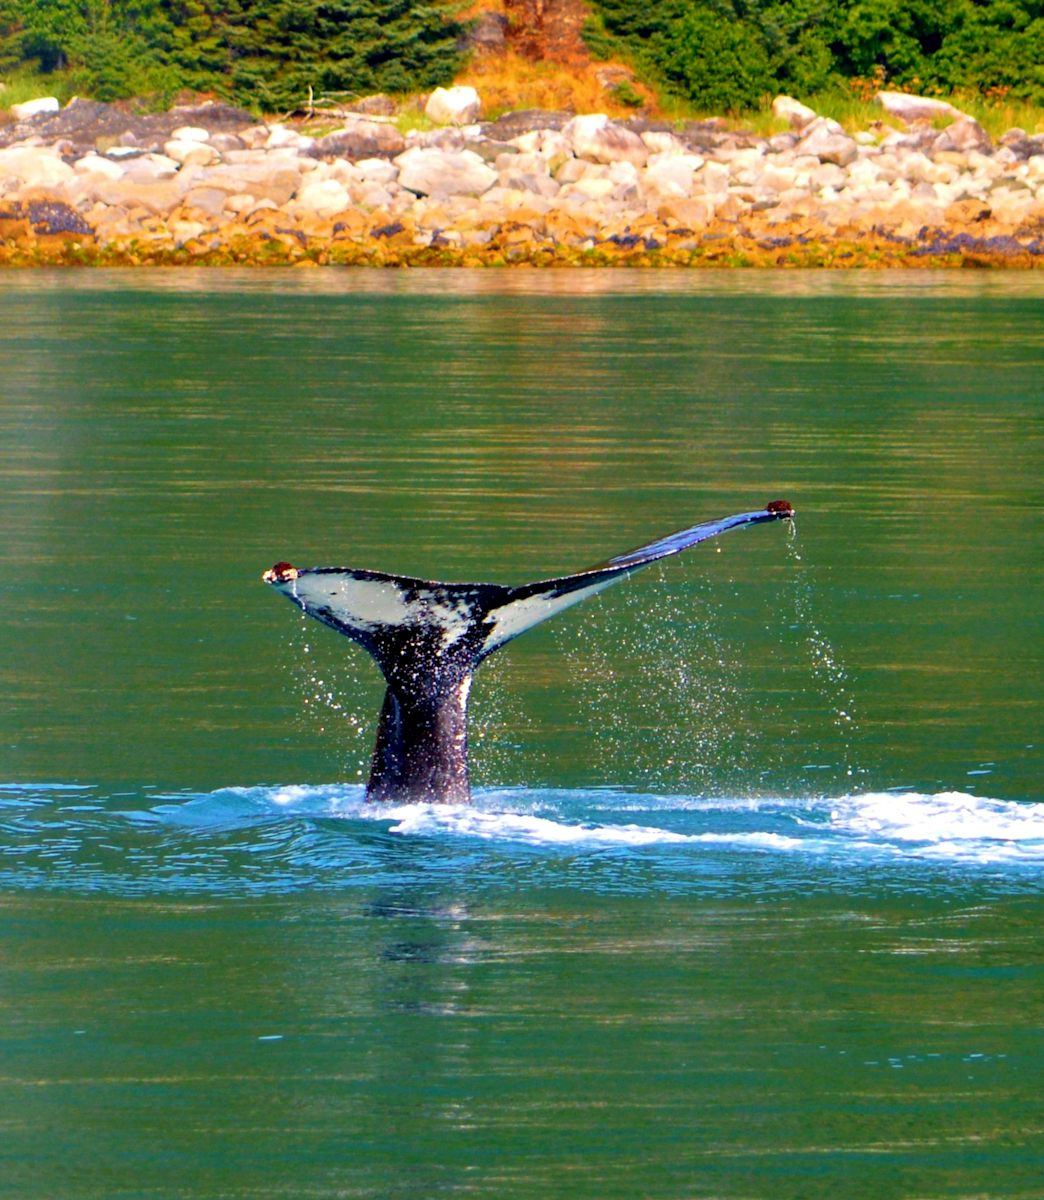 Juneau Whale watching. We saw humpbacks (this is "Flame") and Orcas